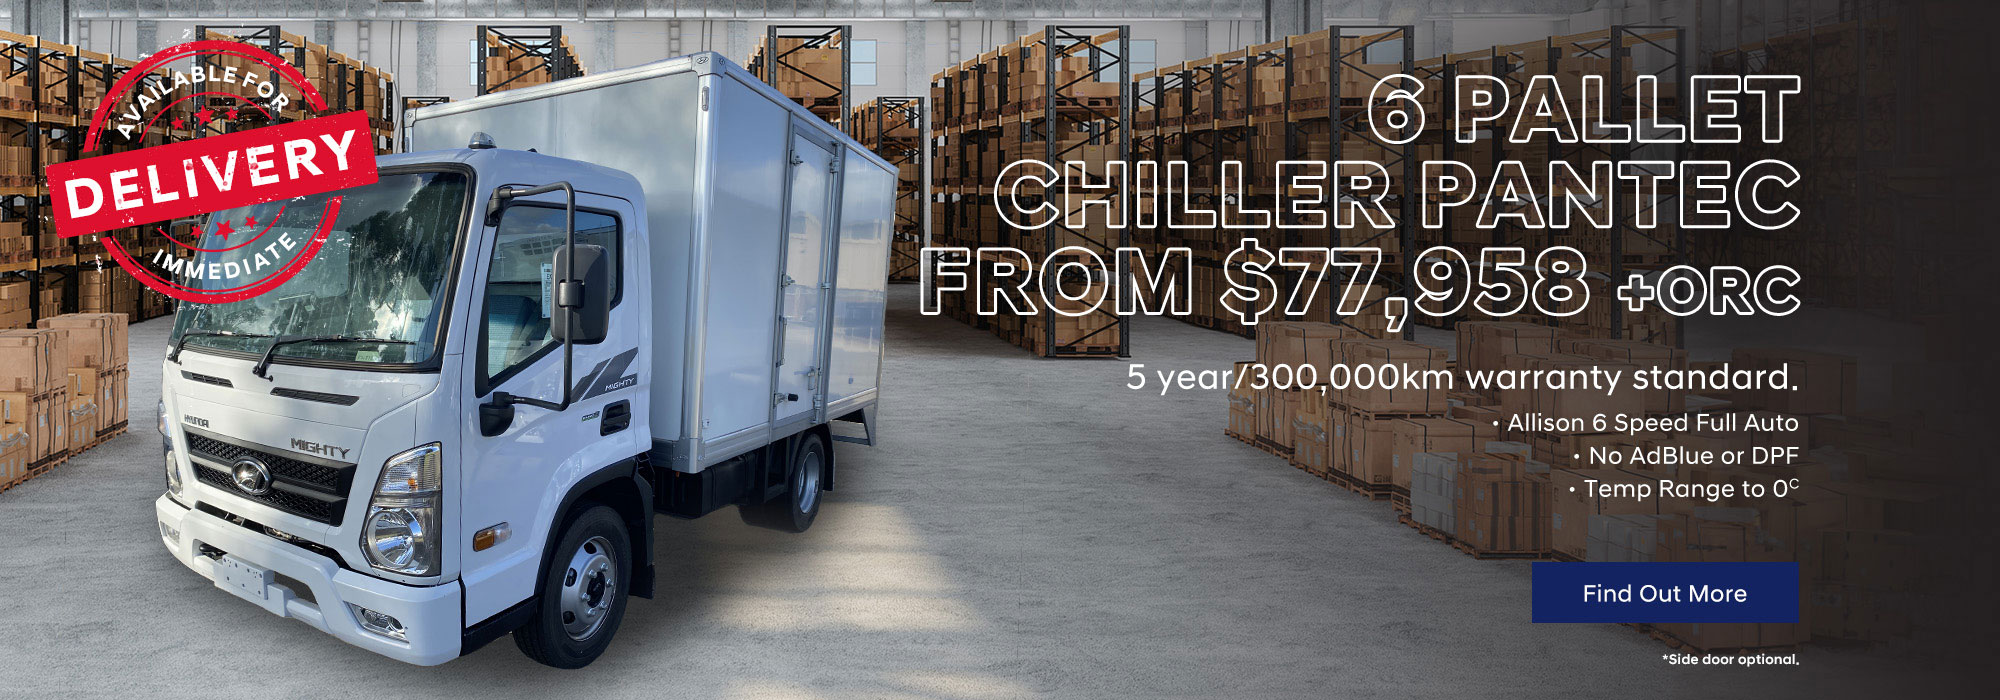 6 Pallet Chiller Pantec from 77,958 dollars plus ORC